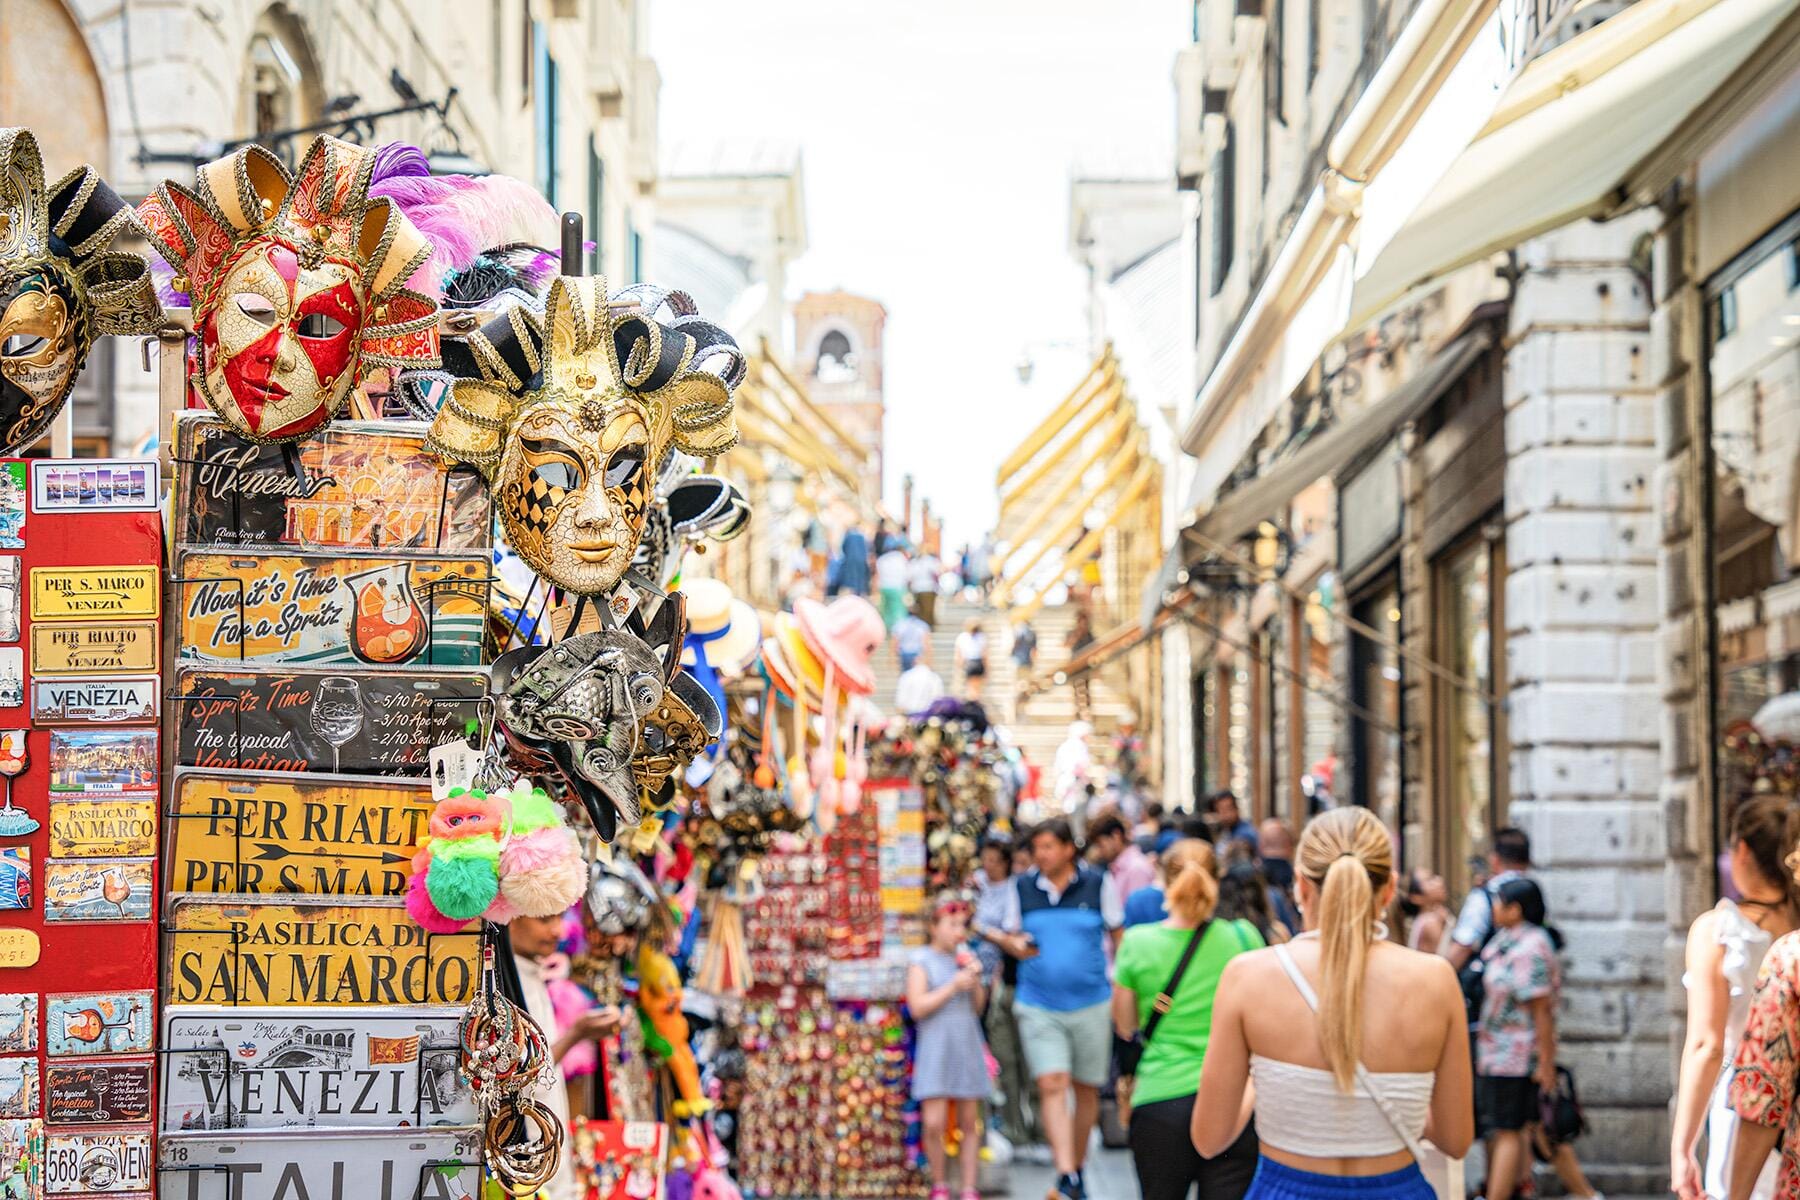 <a href='https://www.fodors.com/world/europe/italy/venice/experiences/news/photos/dont-do-these-things-in-venice-italy#'>From &quot;10 Things You Should NEVER Do if Visiting Venice: Don’t Buy From Cheap Souvenir Shops &quot;</a>